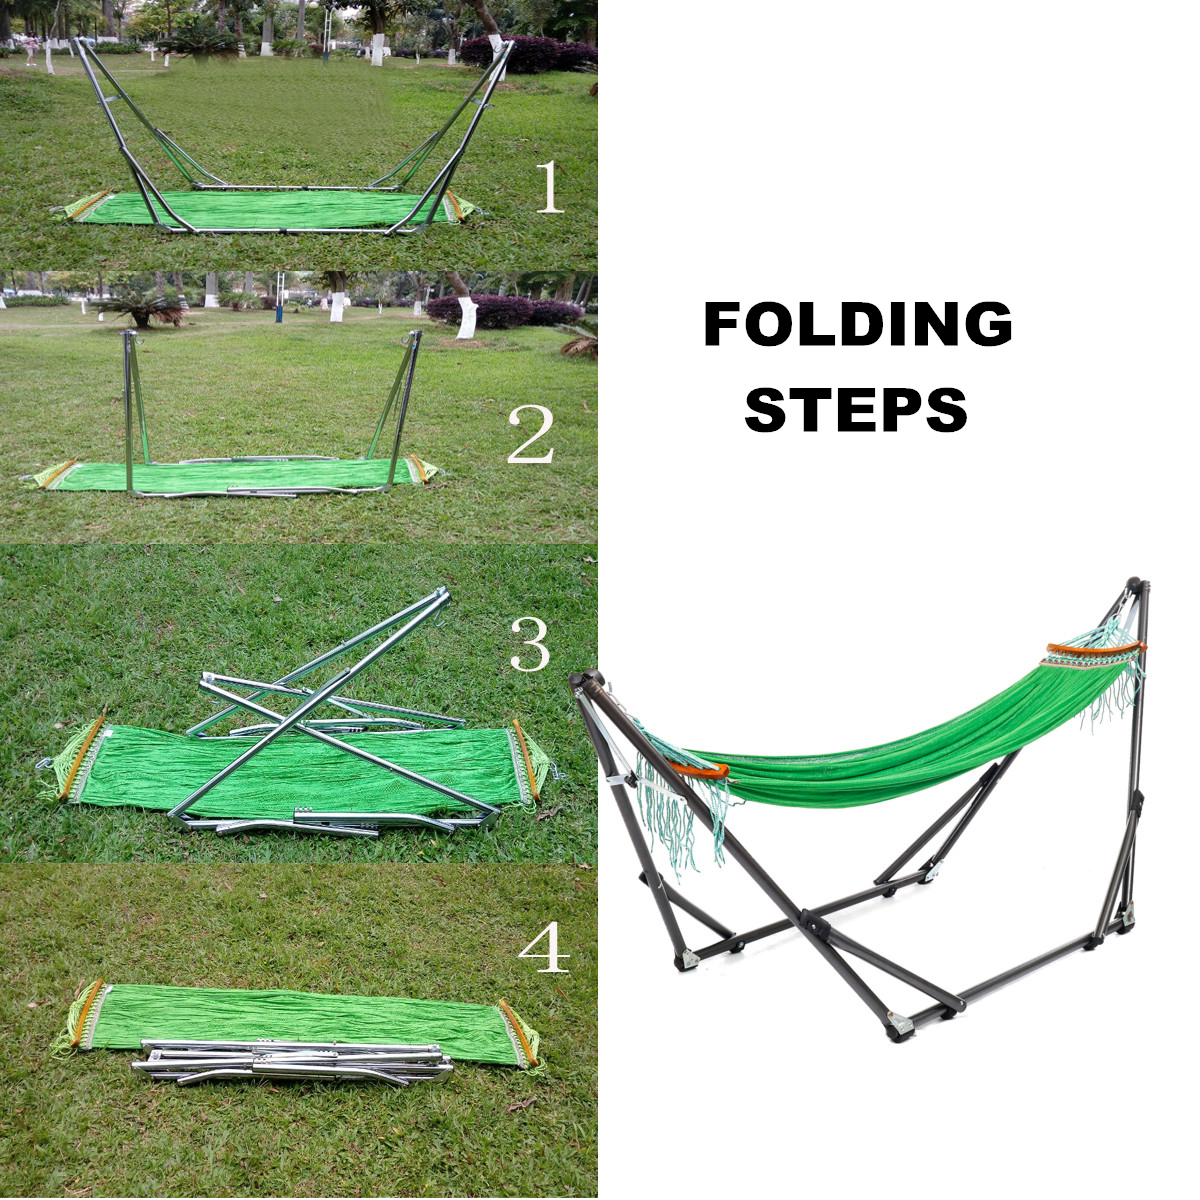 Portable Canvas Hammock Stand Portable Multifunctional Practical Outdoor Garden Swing Hammock Single Hanging Chair Bed Leisure Camping Travel 31